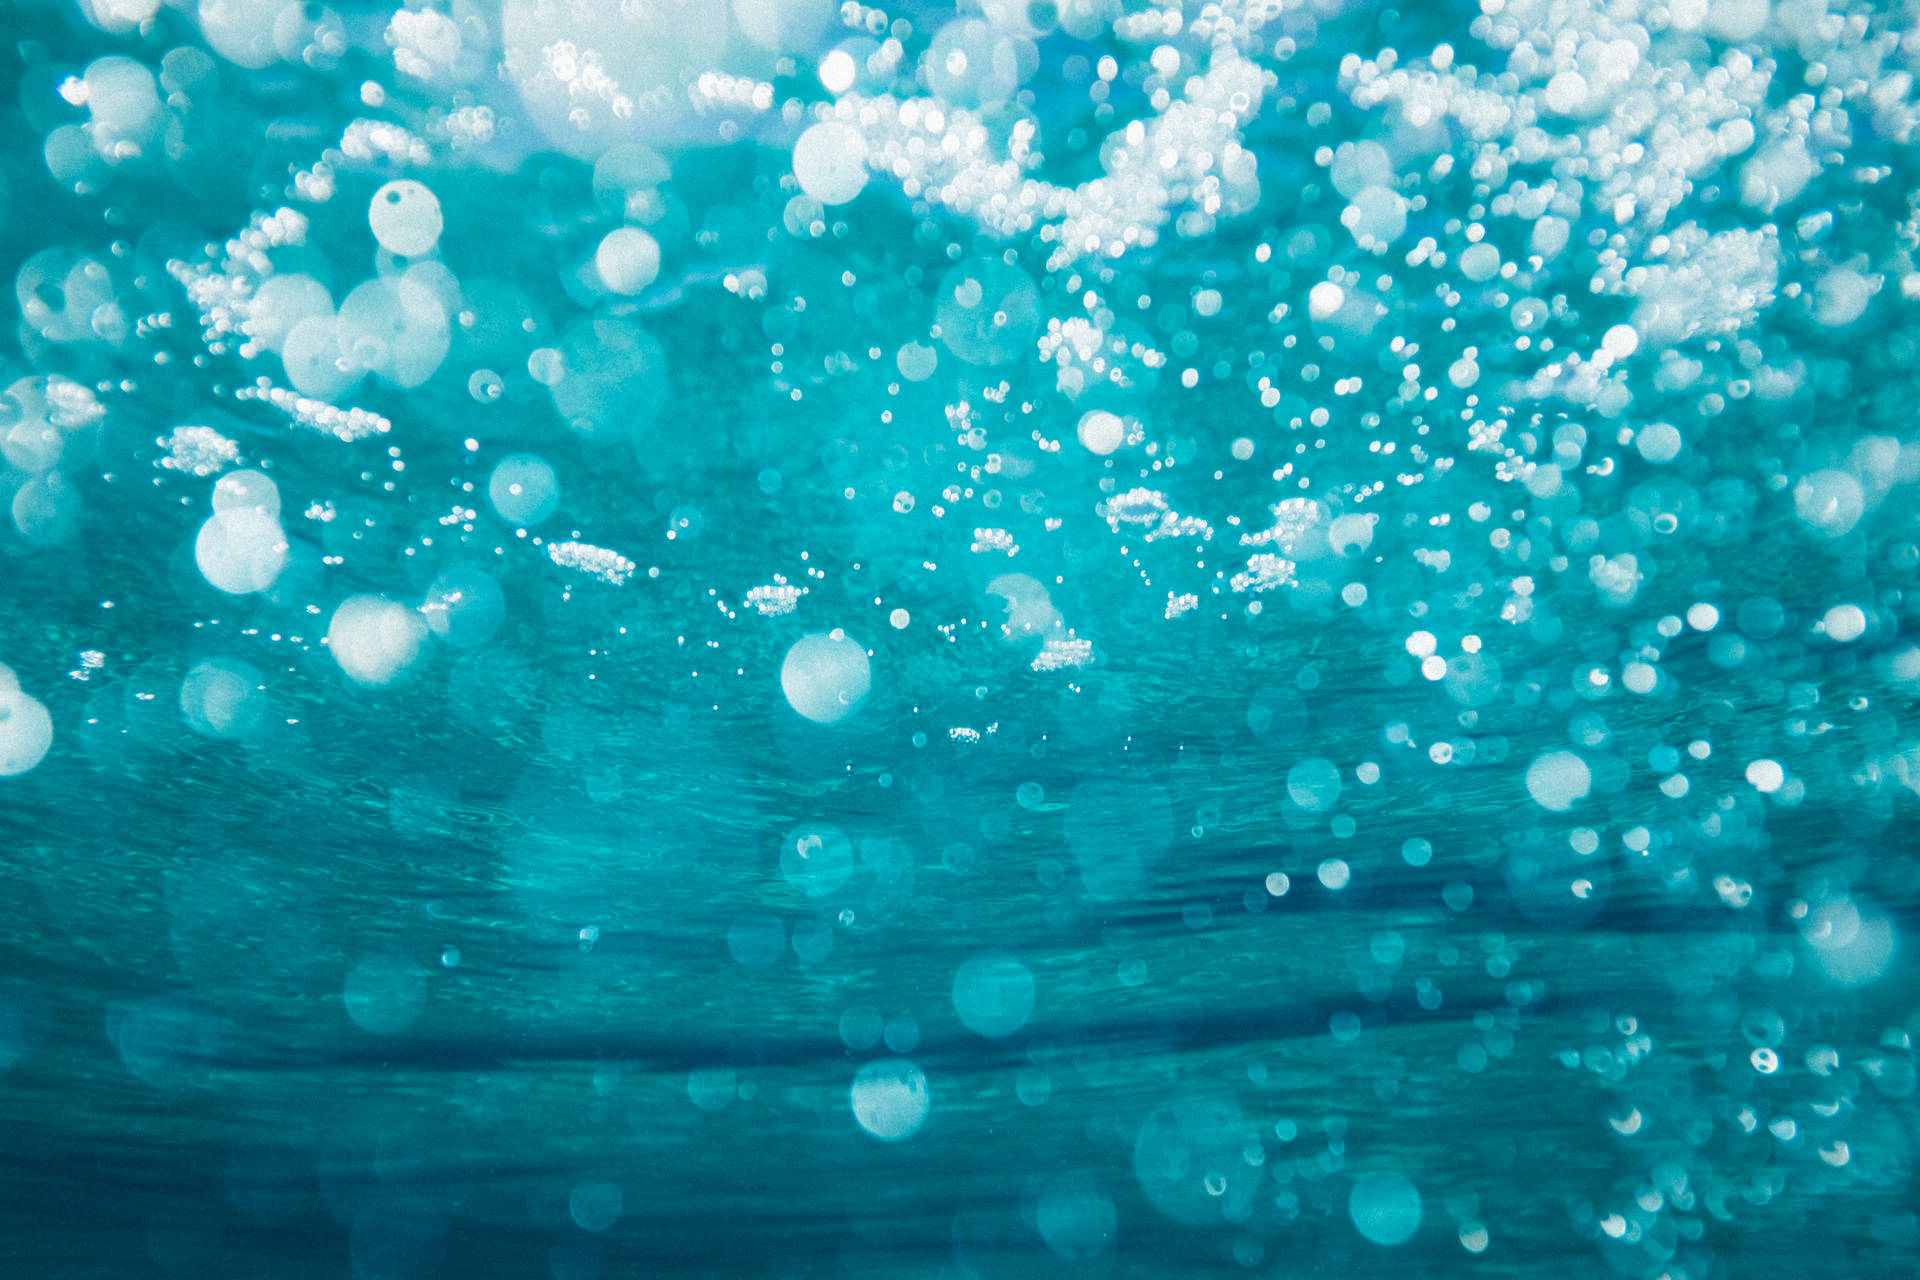 Dive into the bubbly depths of water. Wallpaper